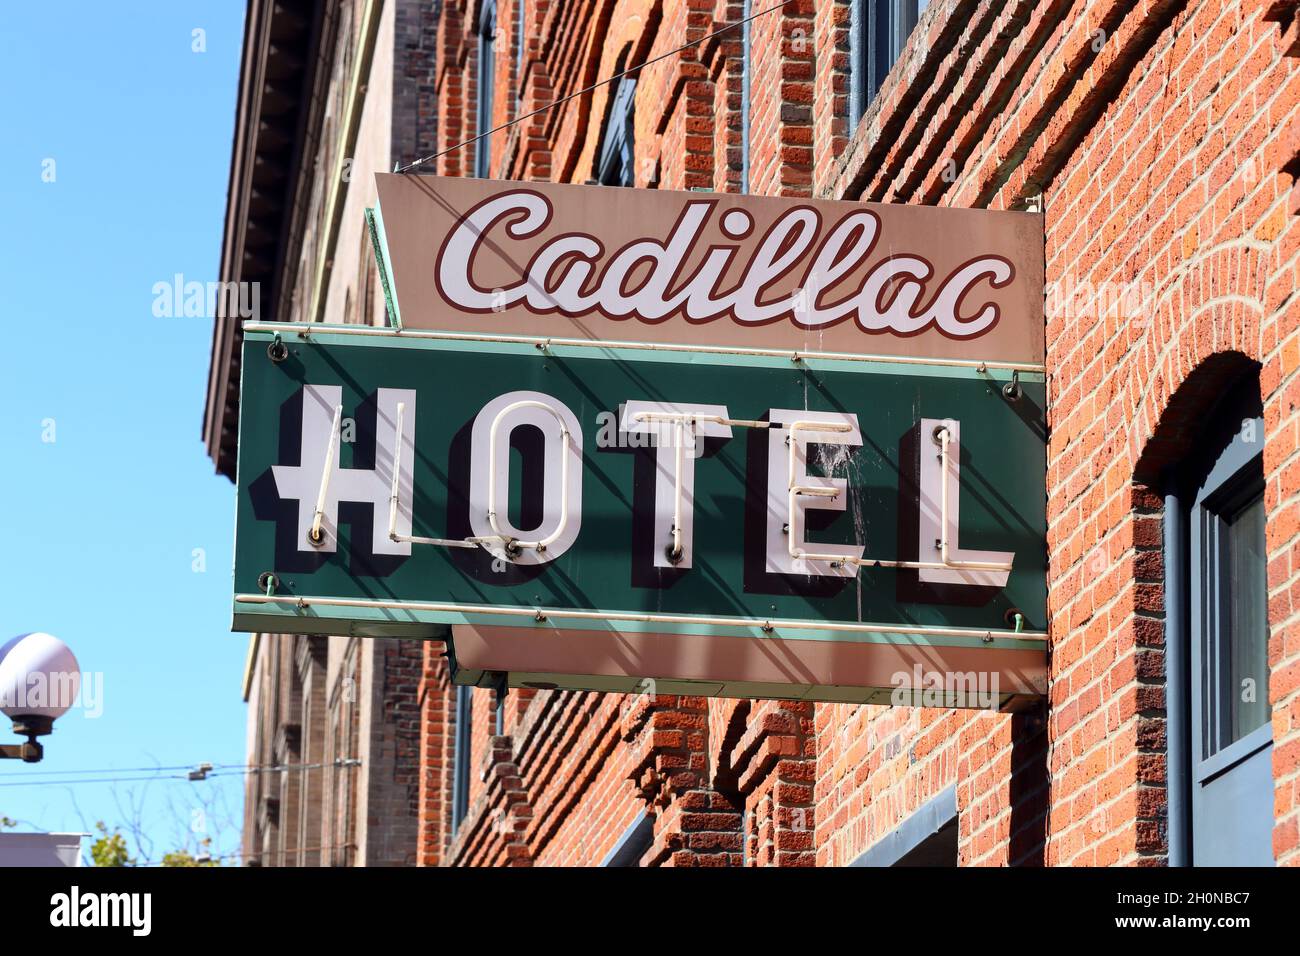 Cadillac Hotel, 168 S Jackson St, Seattle, Washington. neon sign marquee of a historical hotel now National Park Service's Klondike Gold Rush Stock Photo